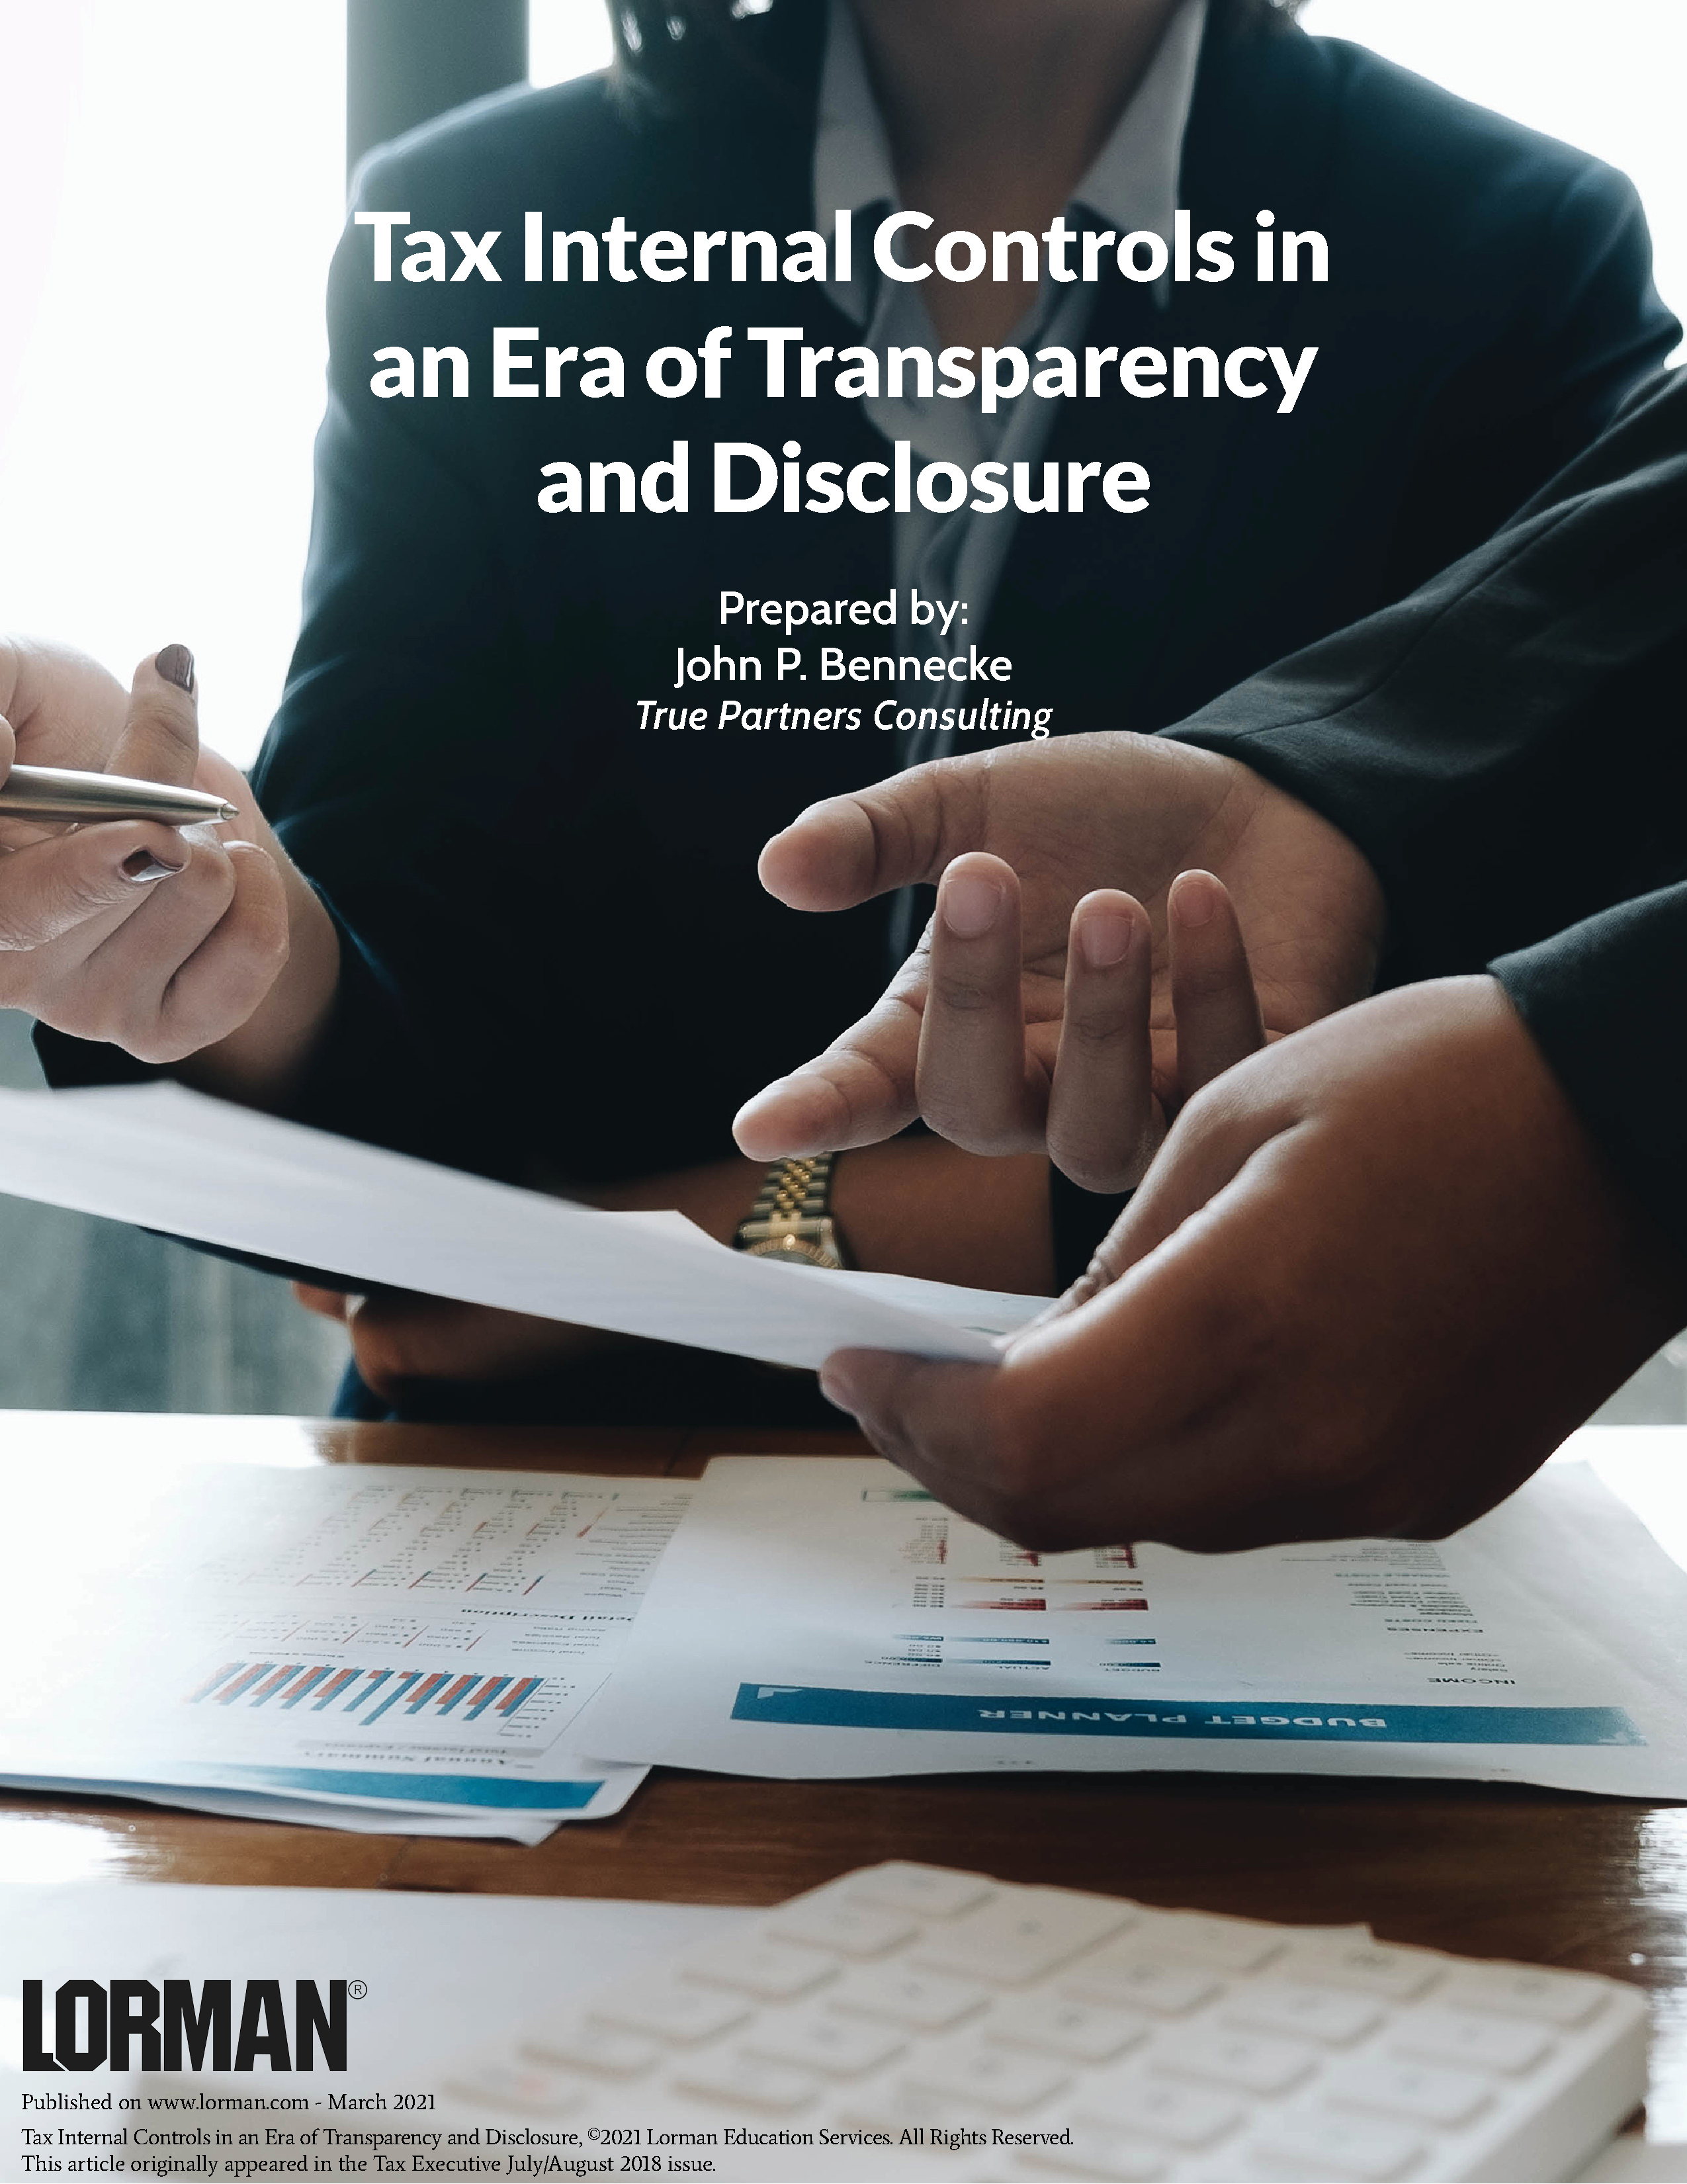 Tax Internal Controls in an Era of Transparency and Disclosure